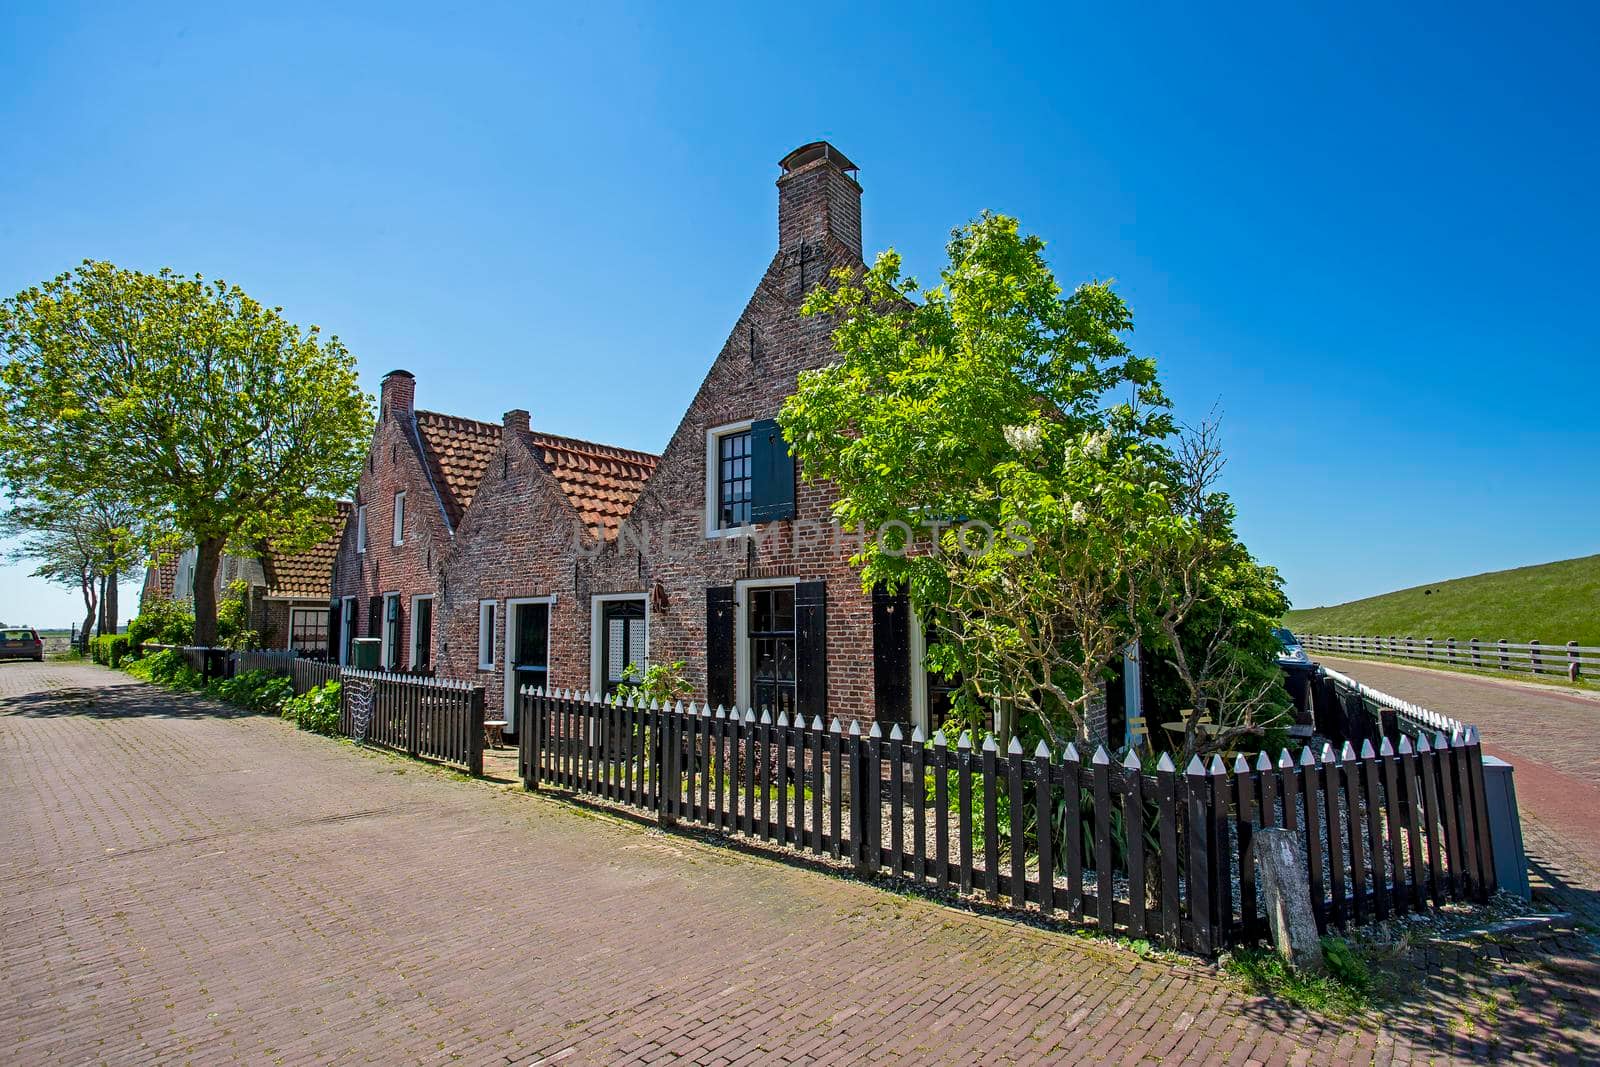 Traditional medieval houses in the village Moddergat in Friesland the Netherlands by devy